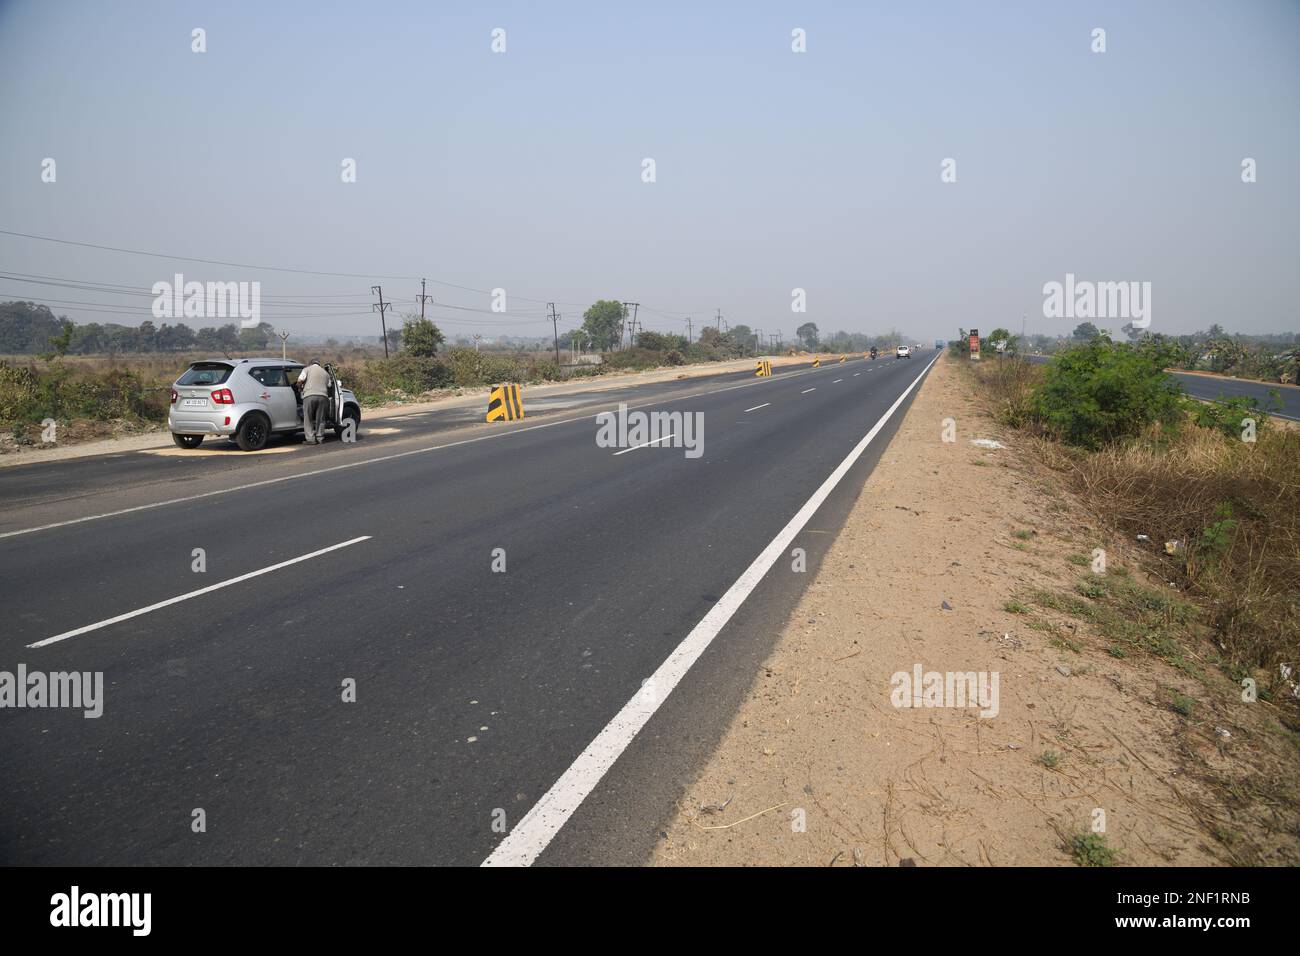 Asian Highway 45 at Singur, Hooghly, West Bengal, India. Stock Photo